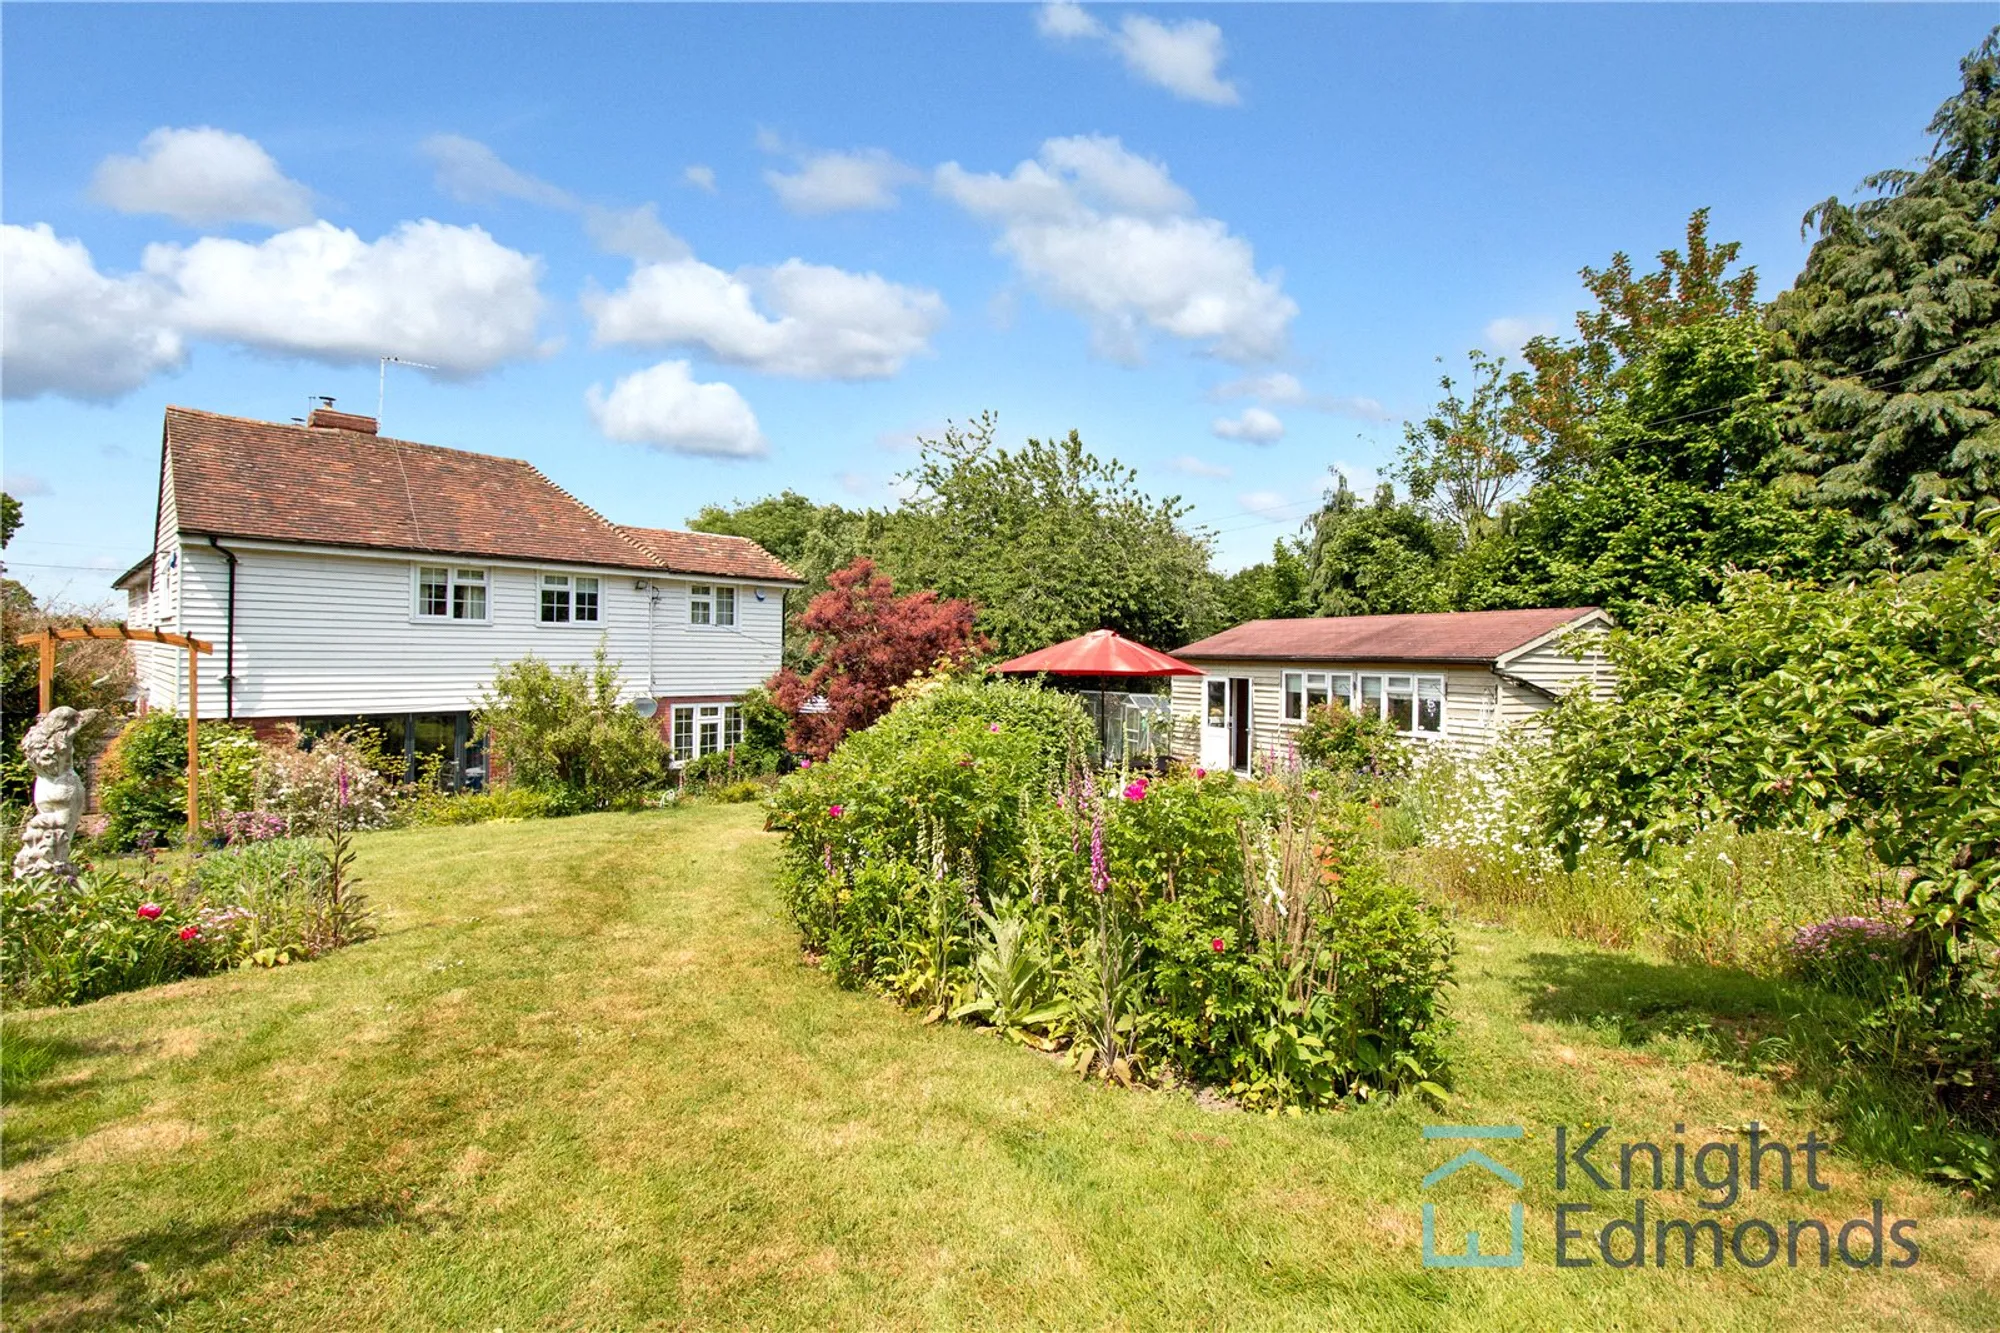 3 bed end of terrace house for sale in Hilltop, Maidstone - Property Image 1